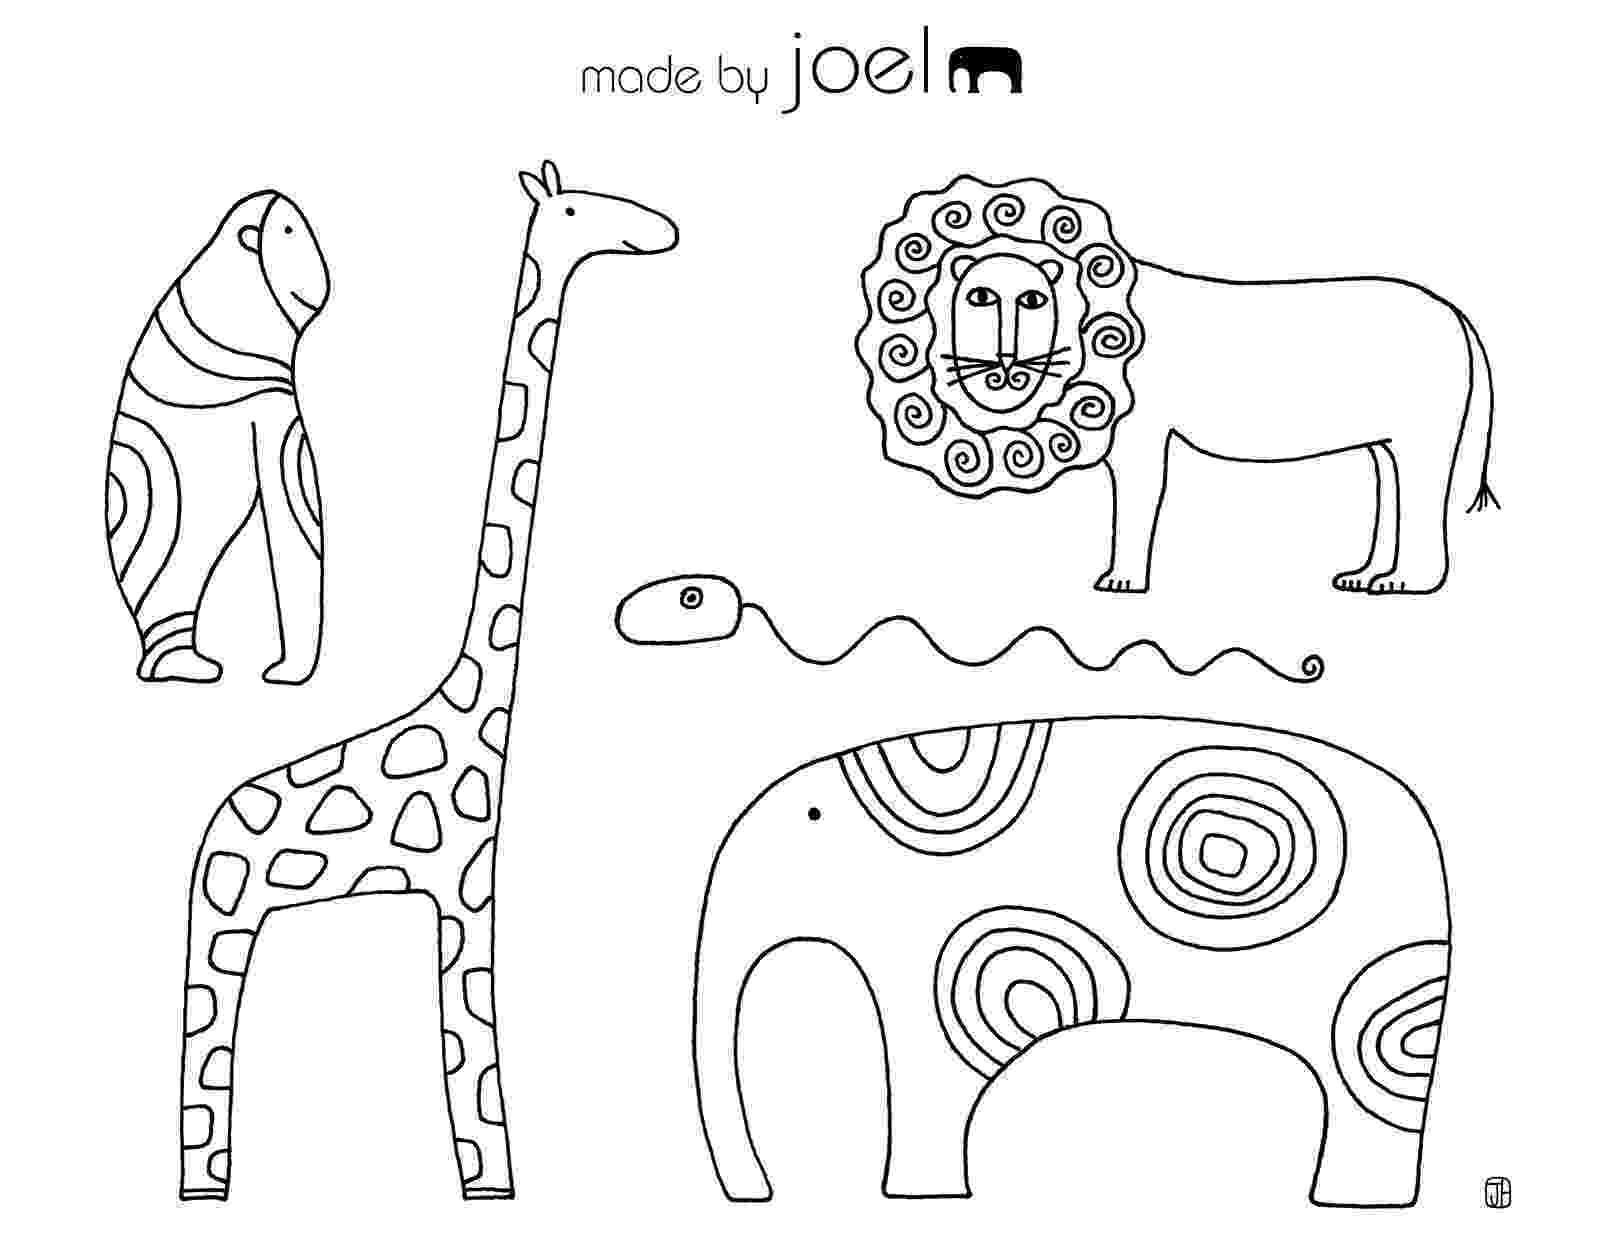 animals colouring by numbers camille de montmorillon chicken maths facts colouring page kindergarten math by colouring de montmorillon animals camille numbers 